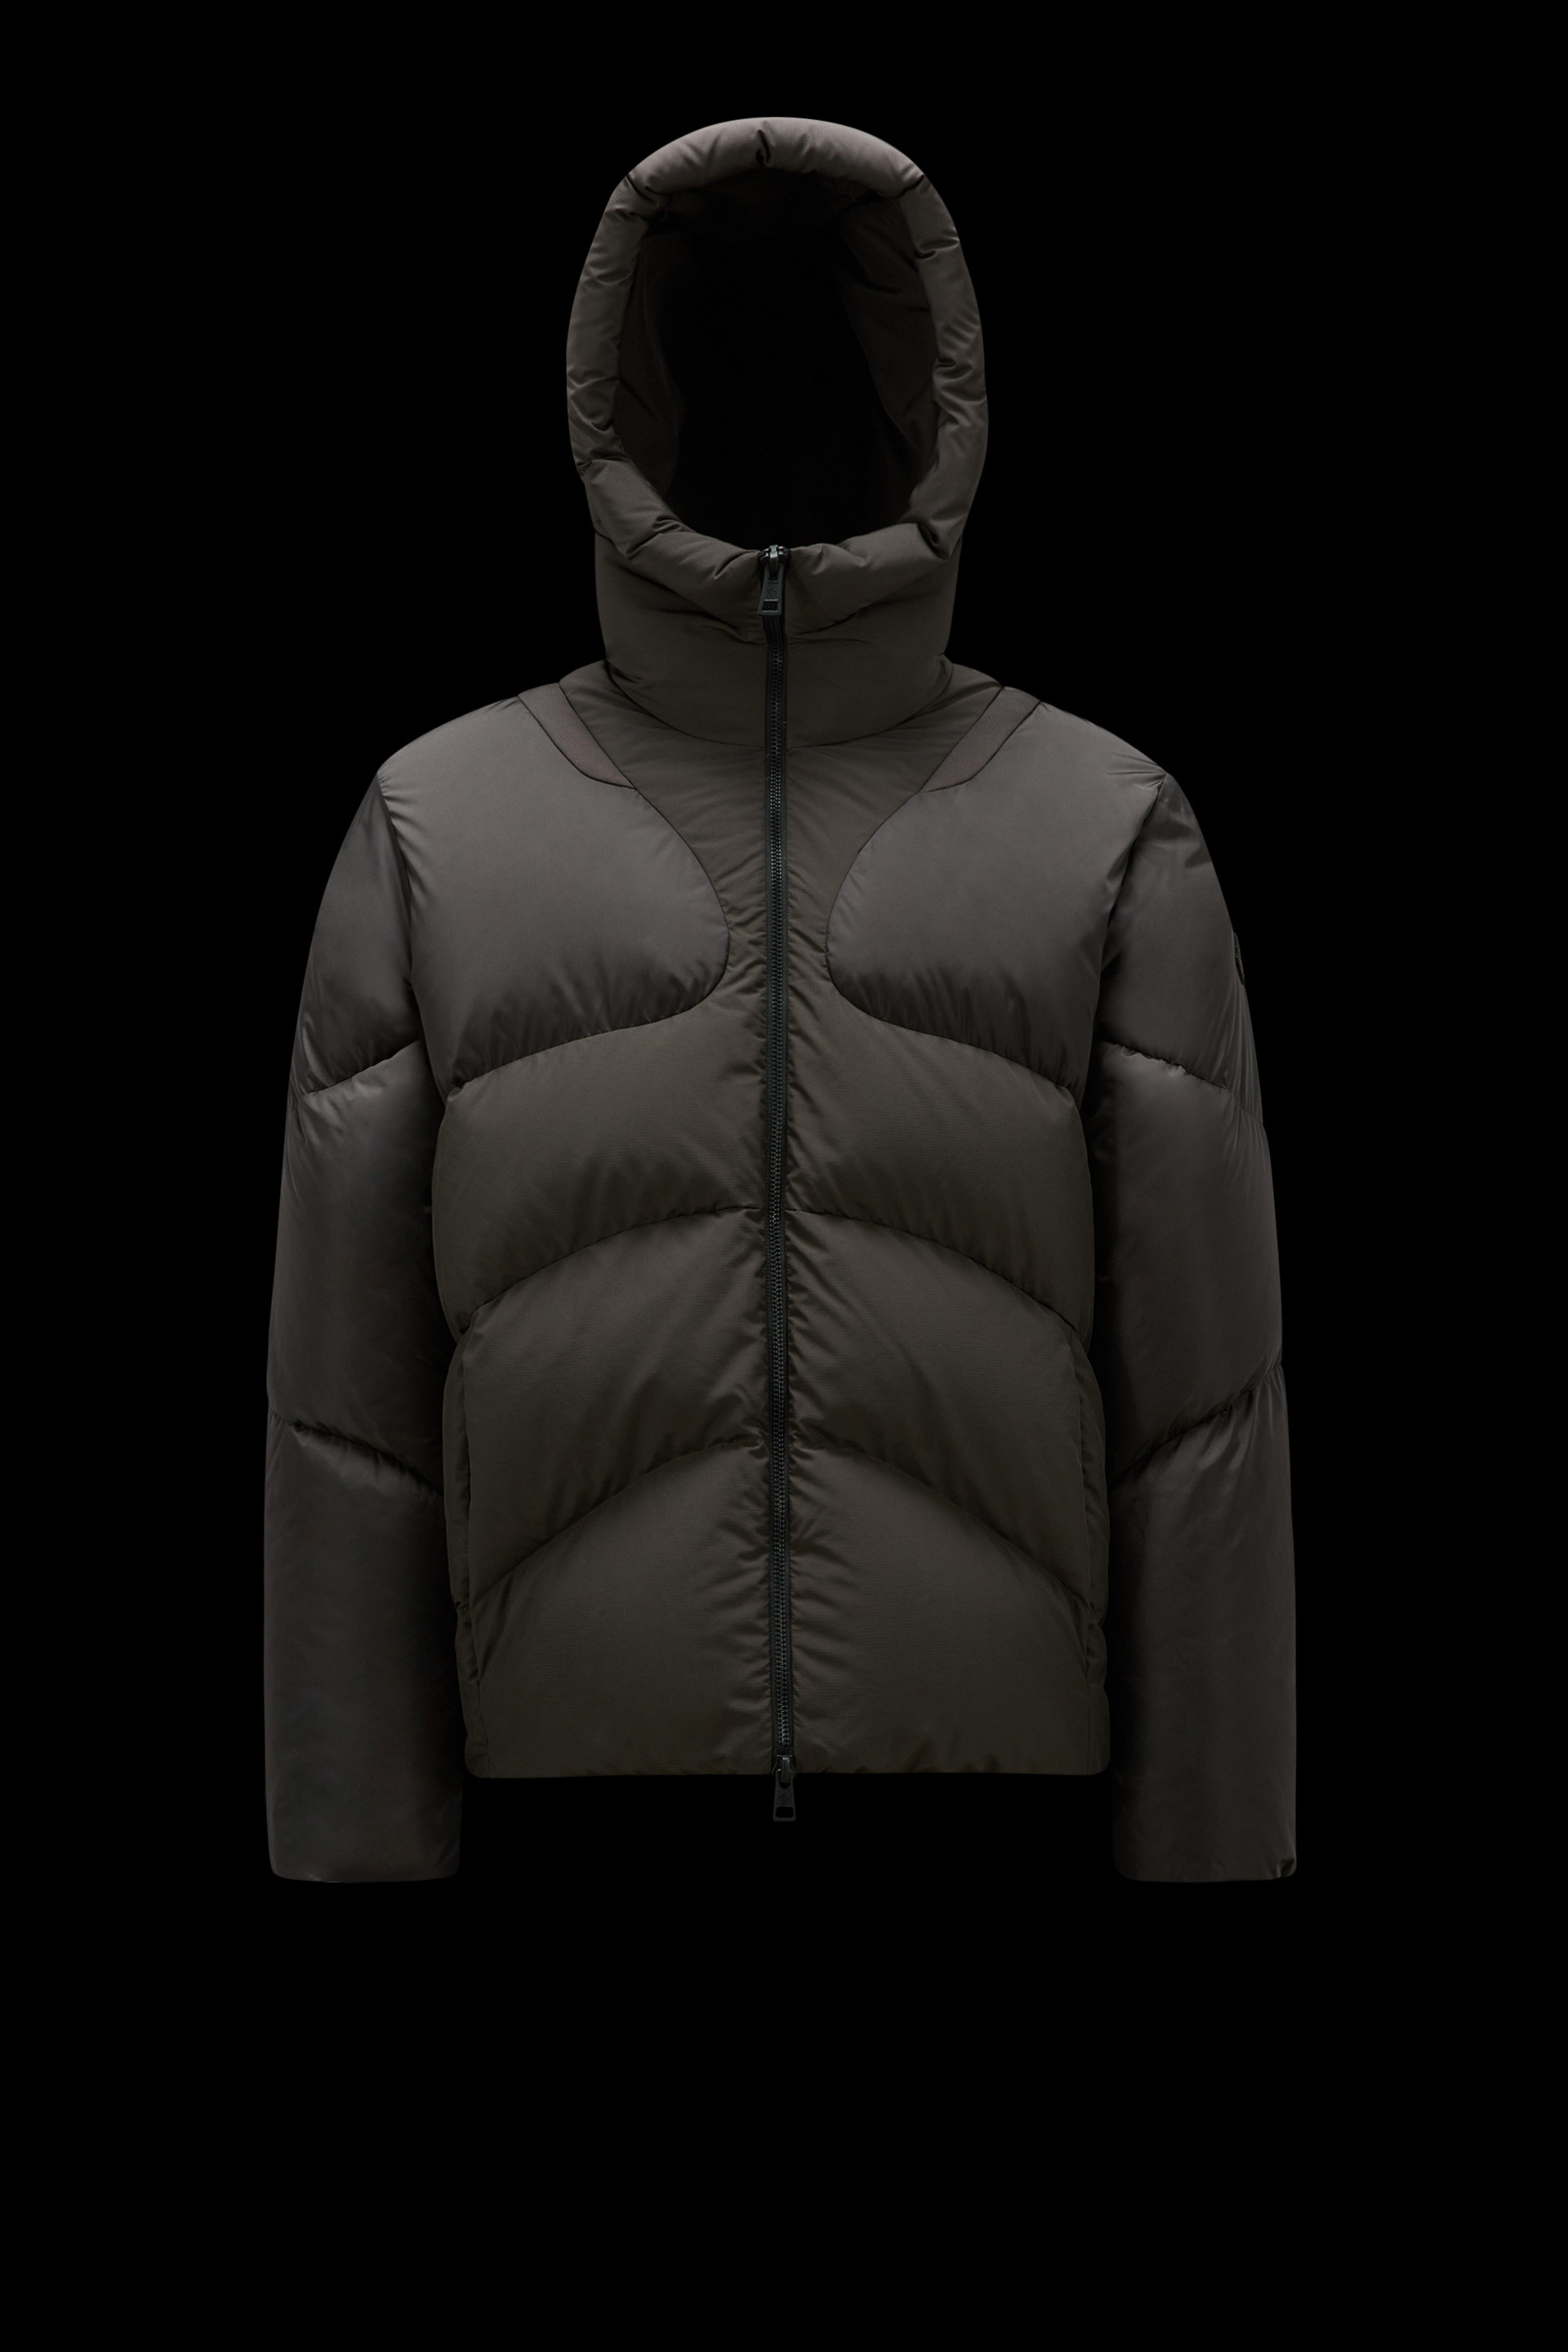 Moncler Born To Protect: A Commitment to Tomorrow l Moncler Now